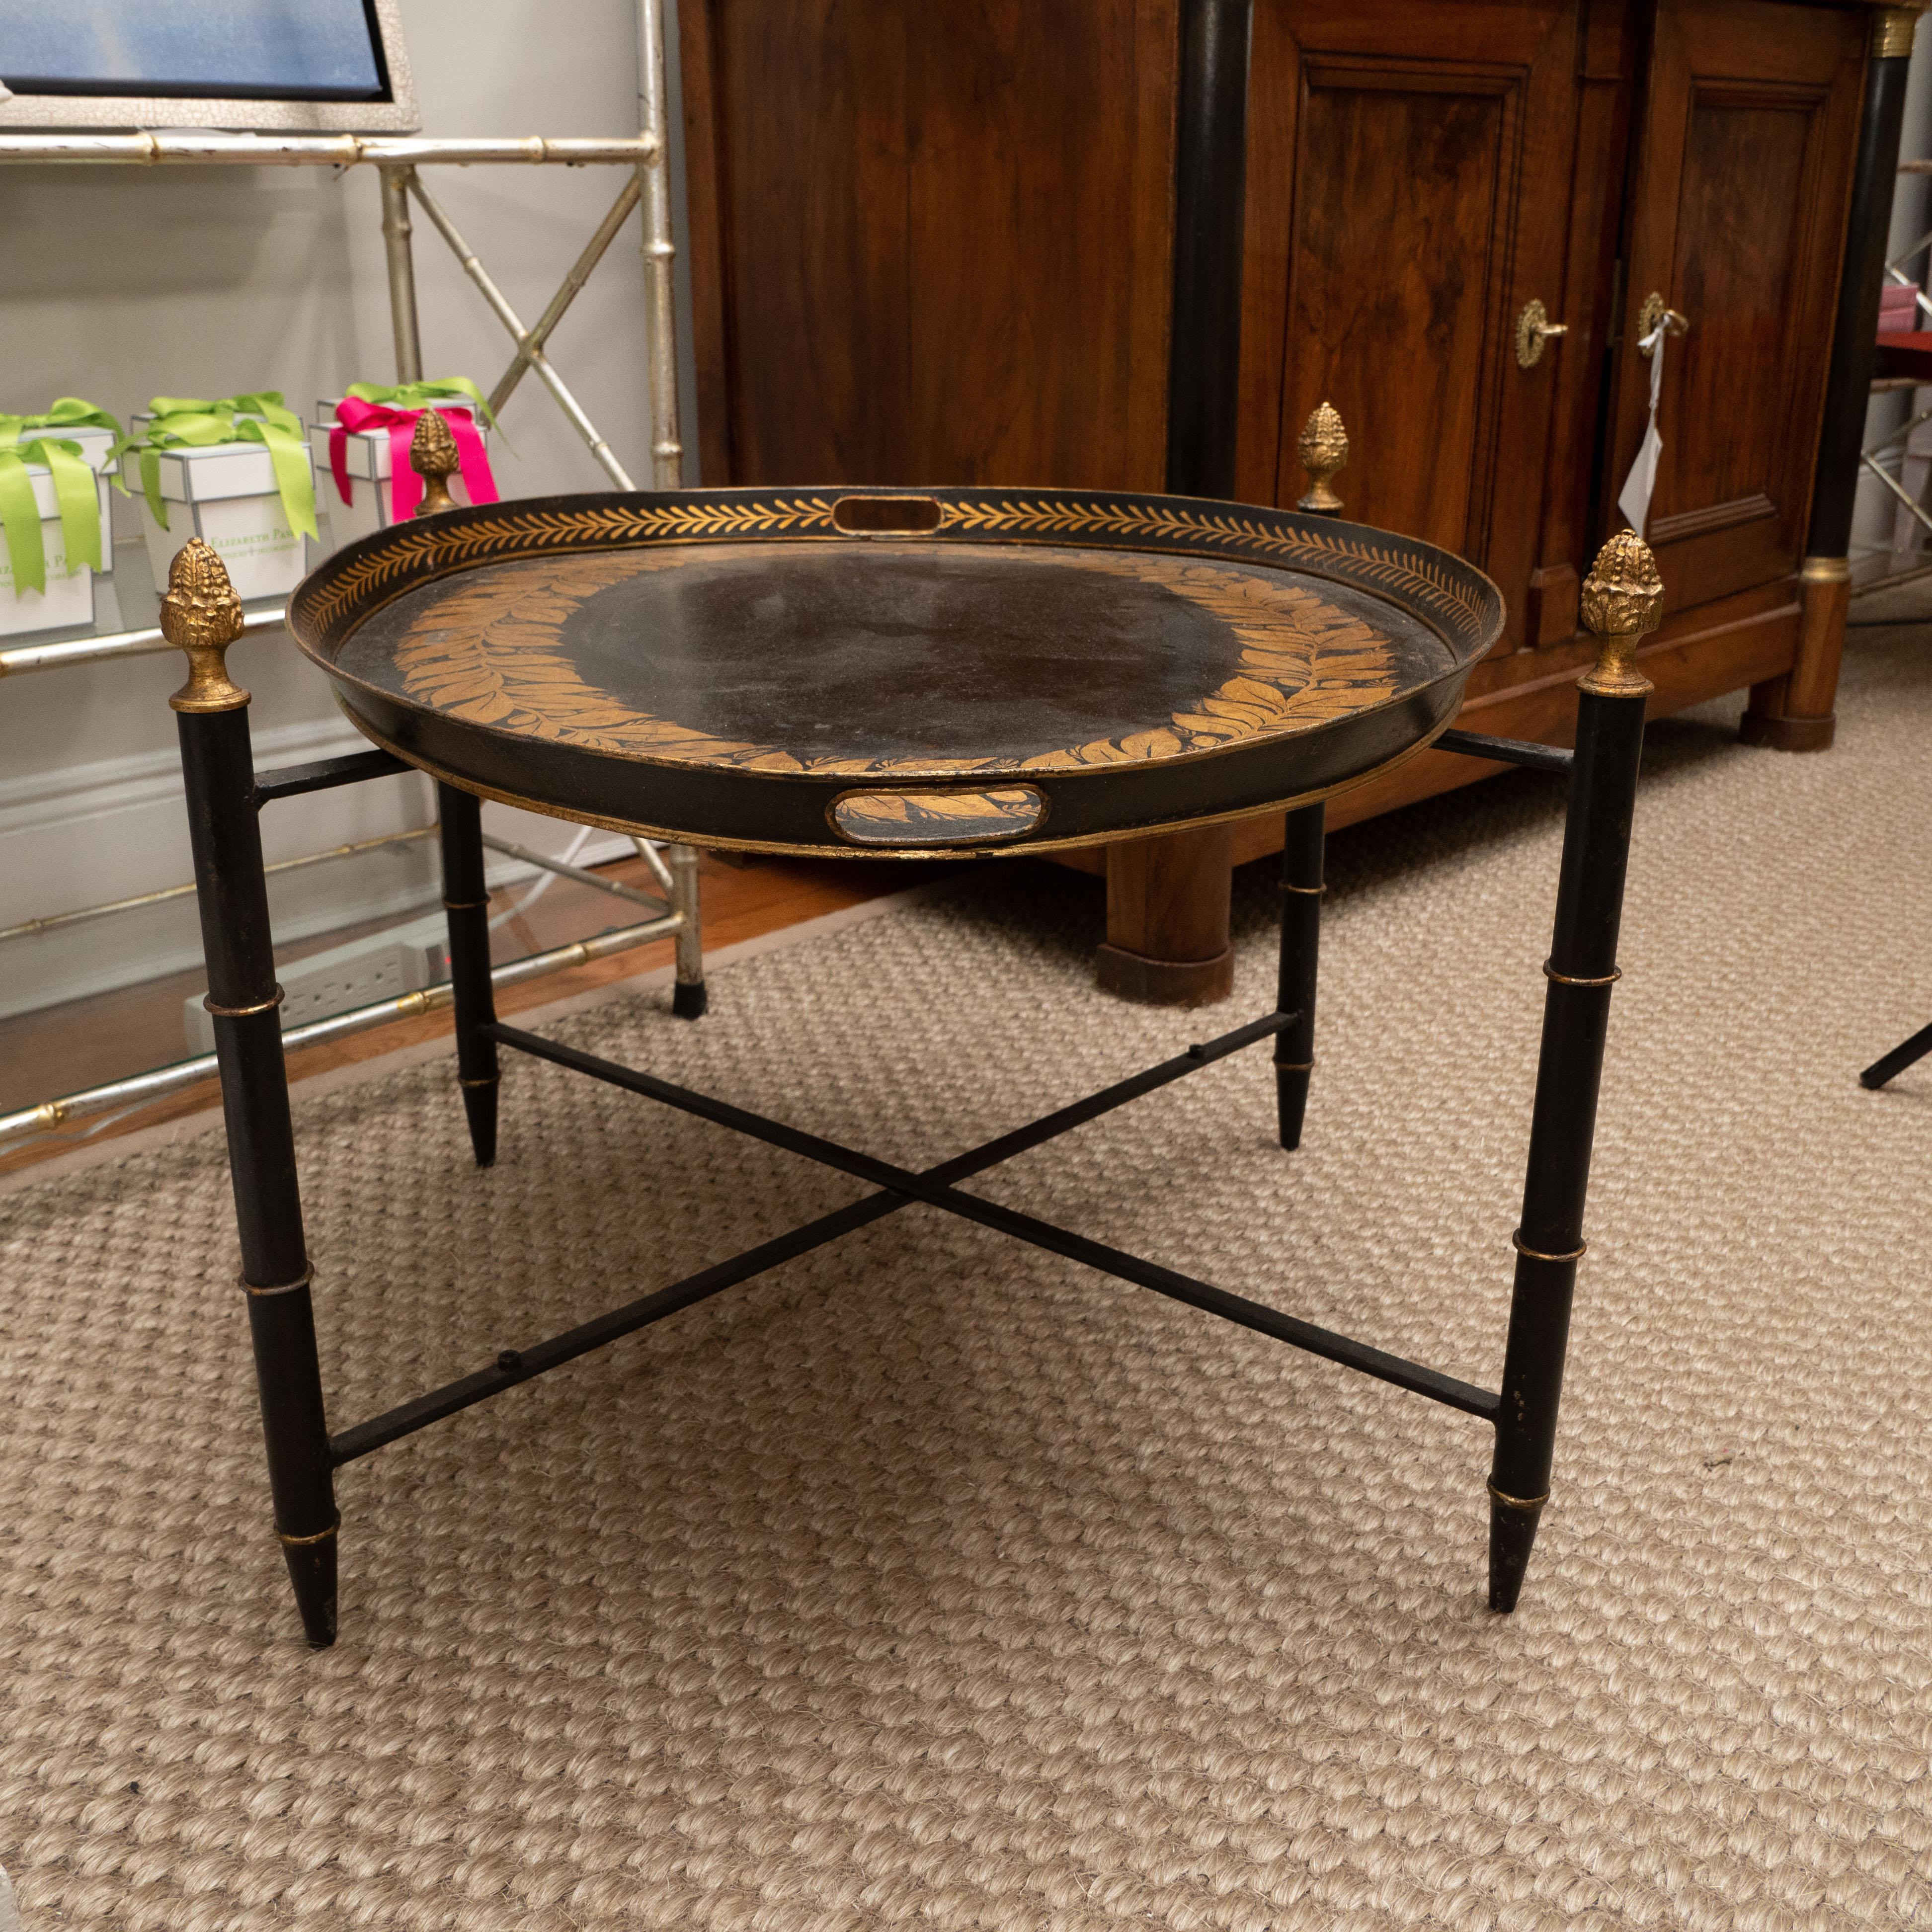 Black Tole Table with Decorative Oval Top and X-Frame Bases 2